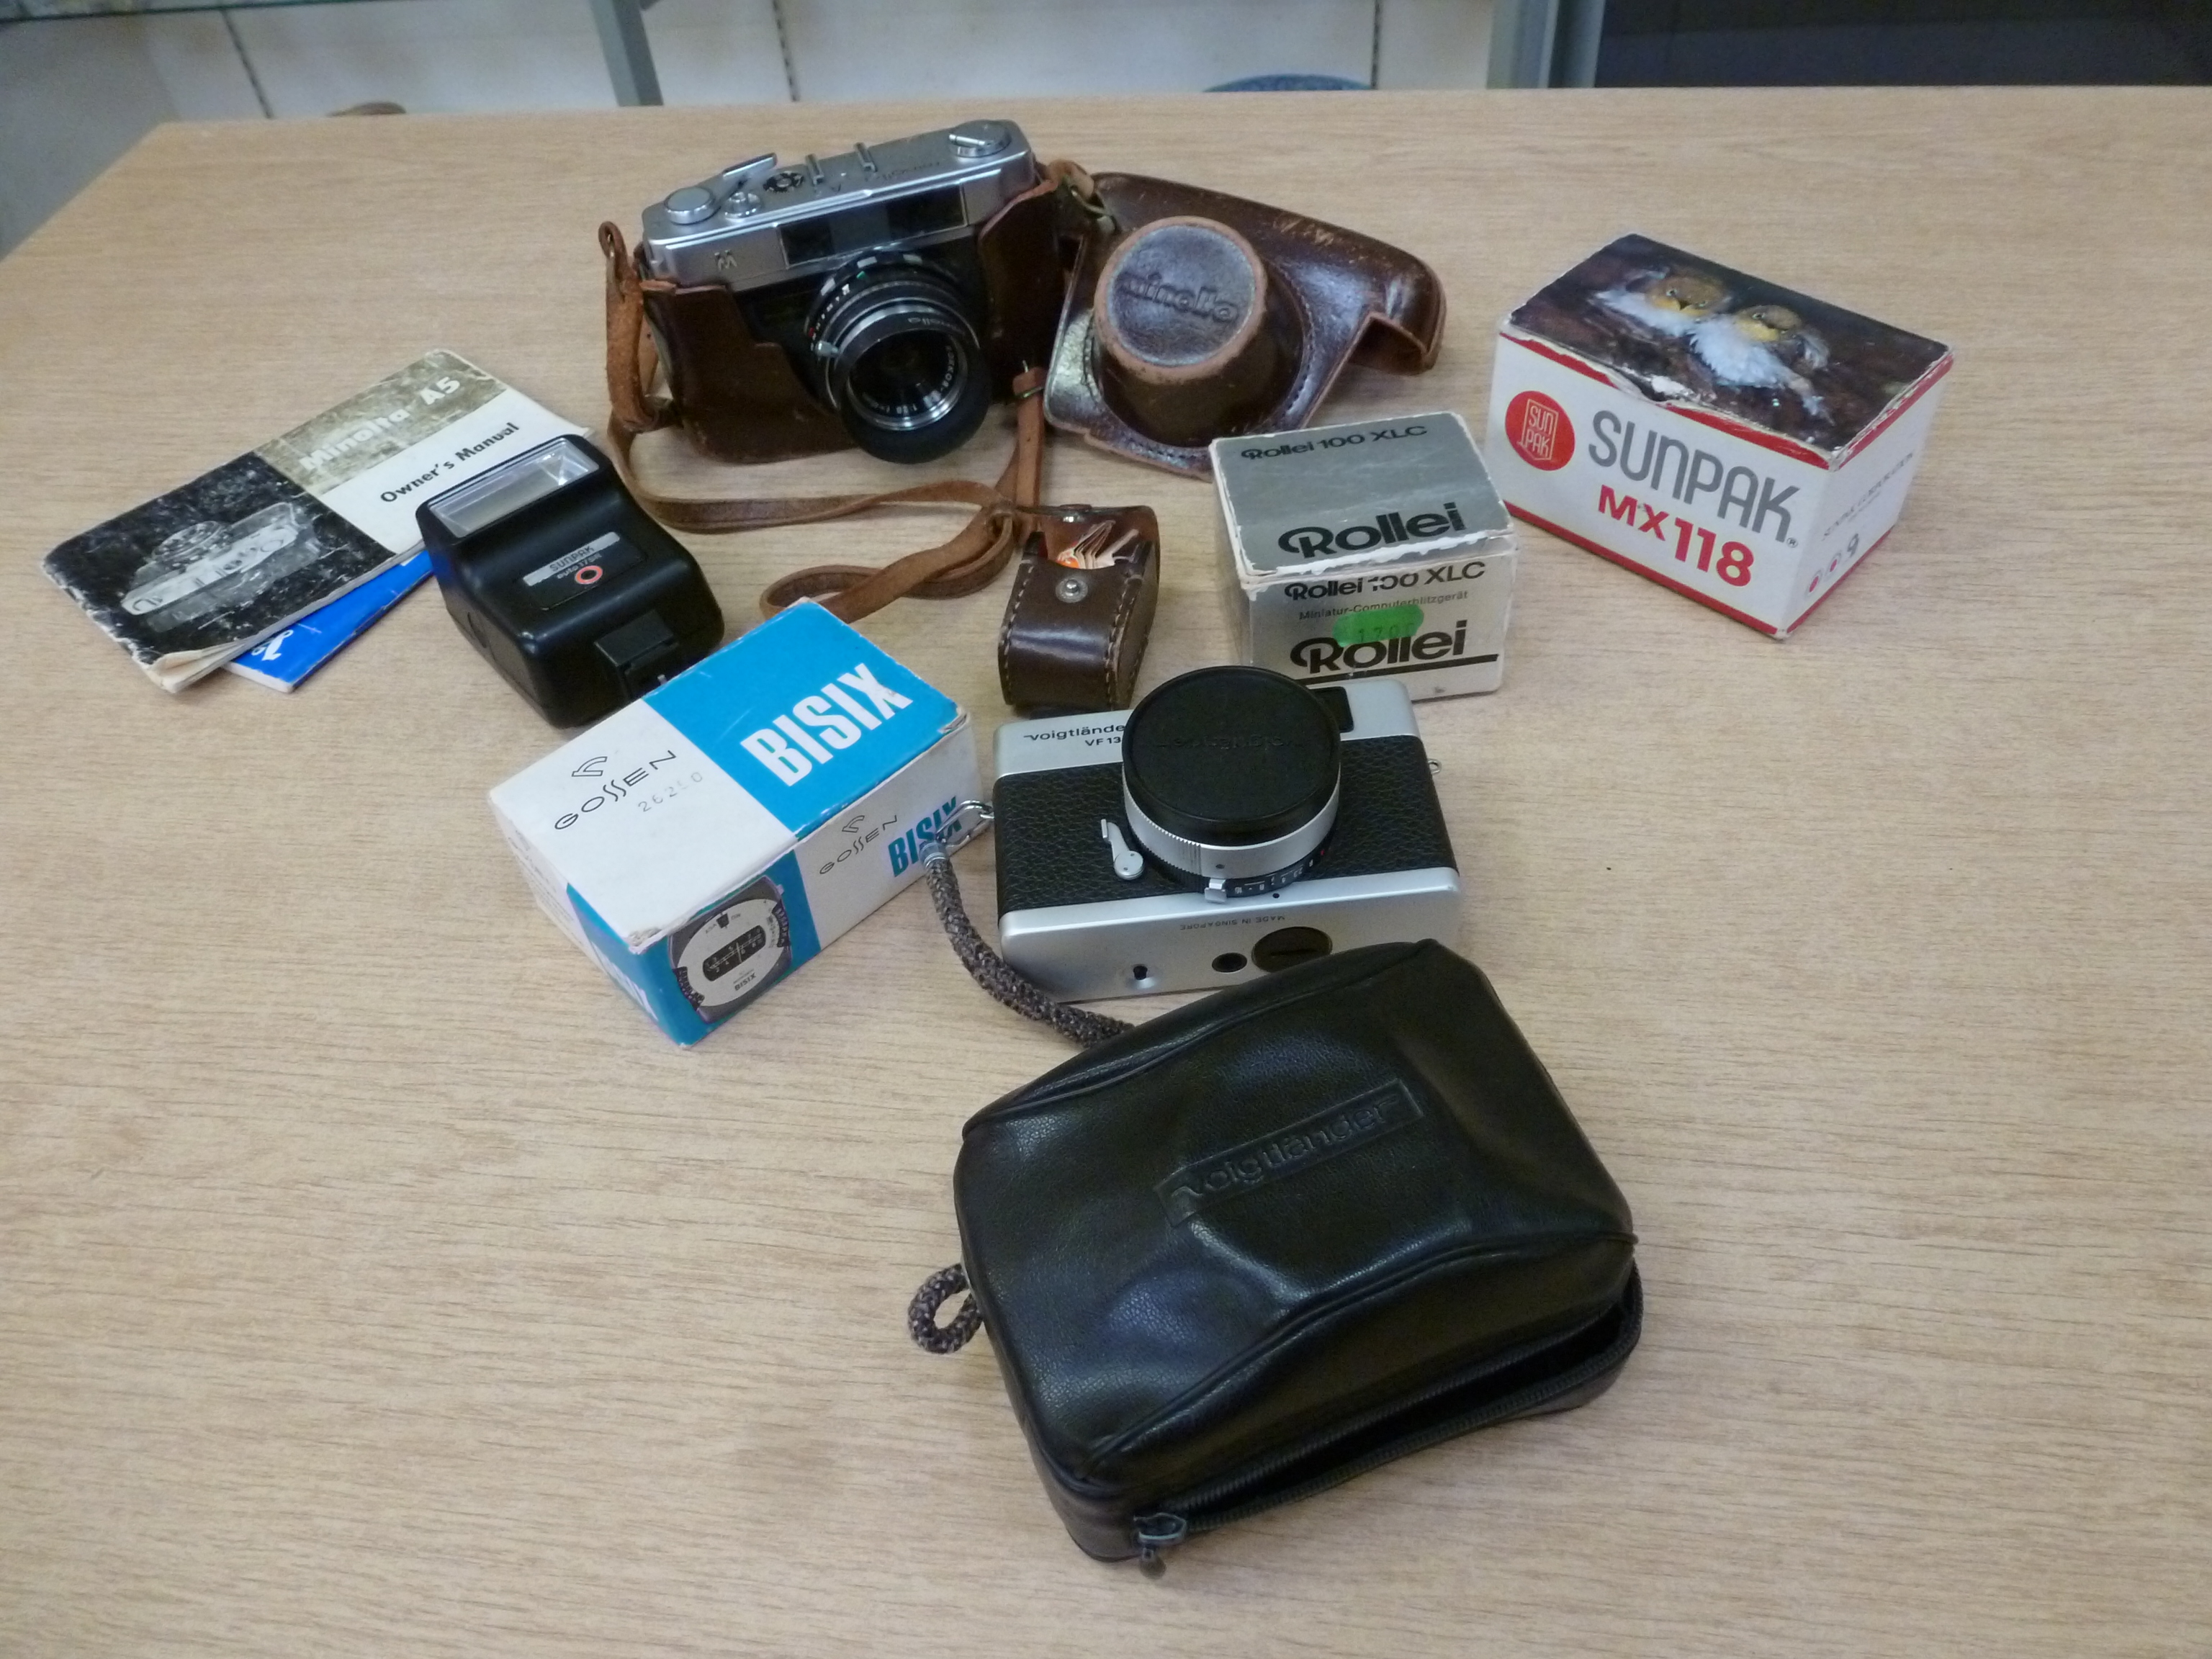 A Minolta A5 camera case with Rokkor-TD1 to 28 lens together with a Voigtlander VF135 camera and